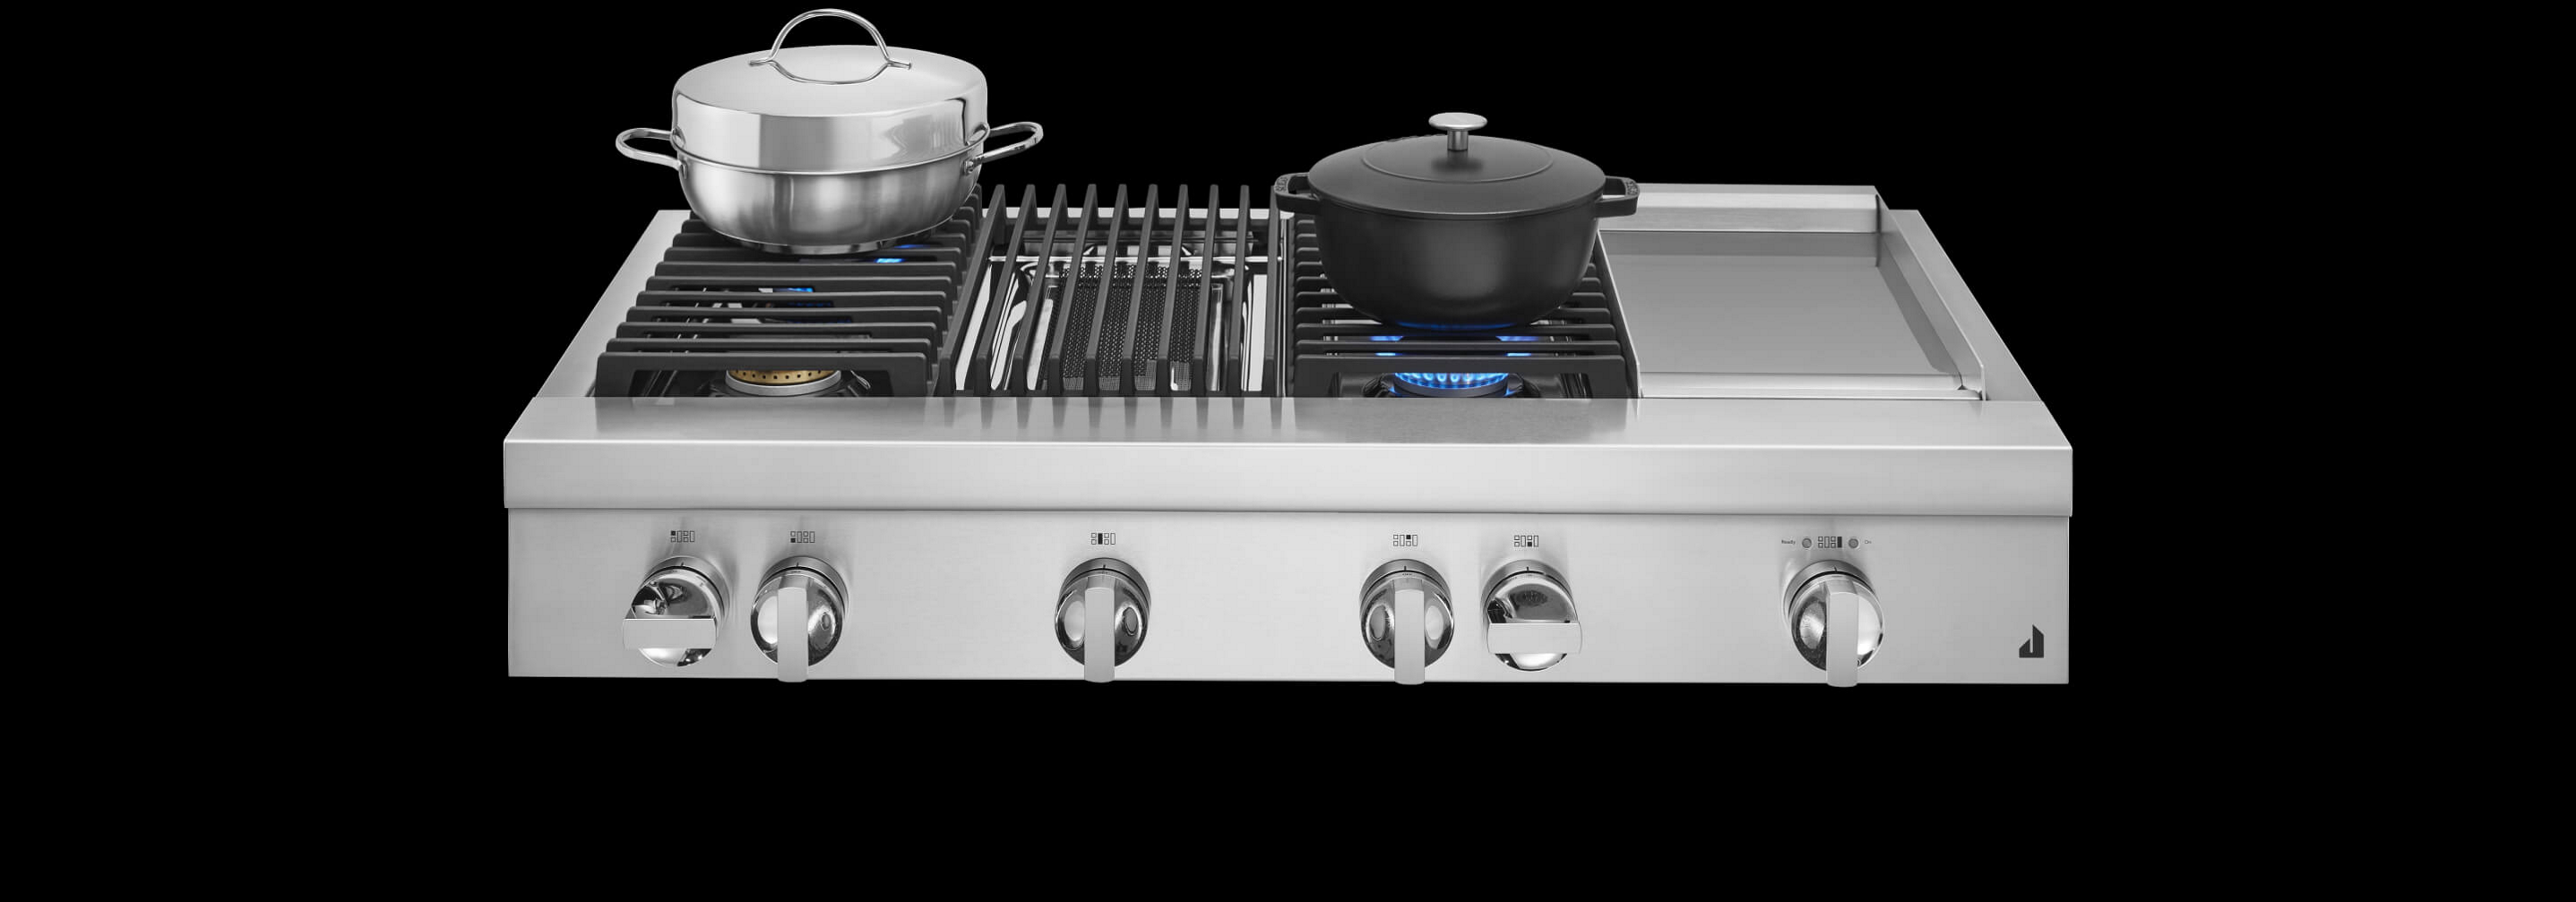 A JennAir® Professional-Style Range in NOIR™ Design, with stainless steel and cast iron pans atop lit burners.